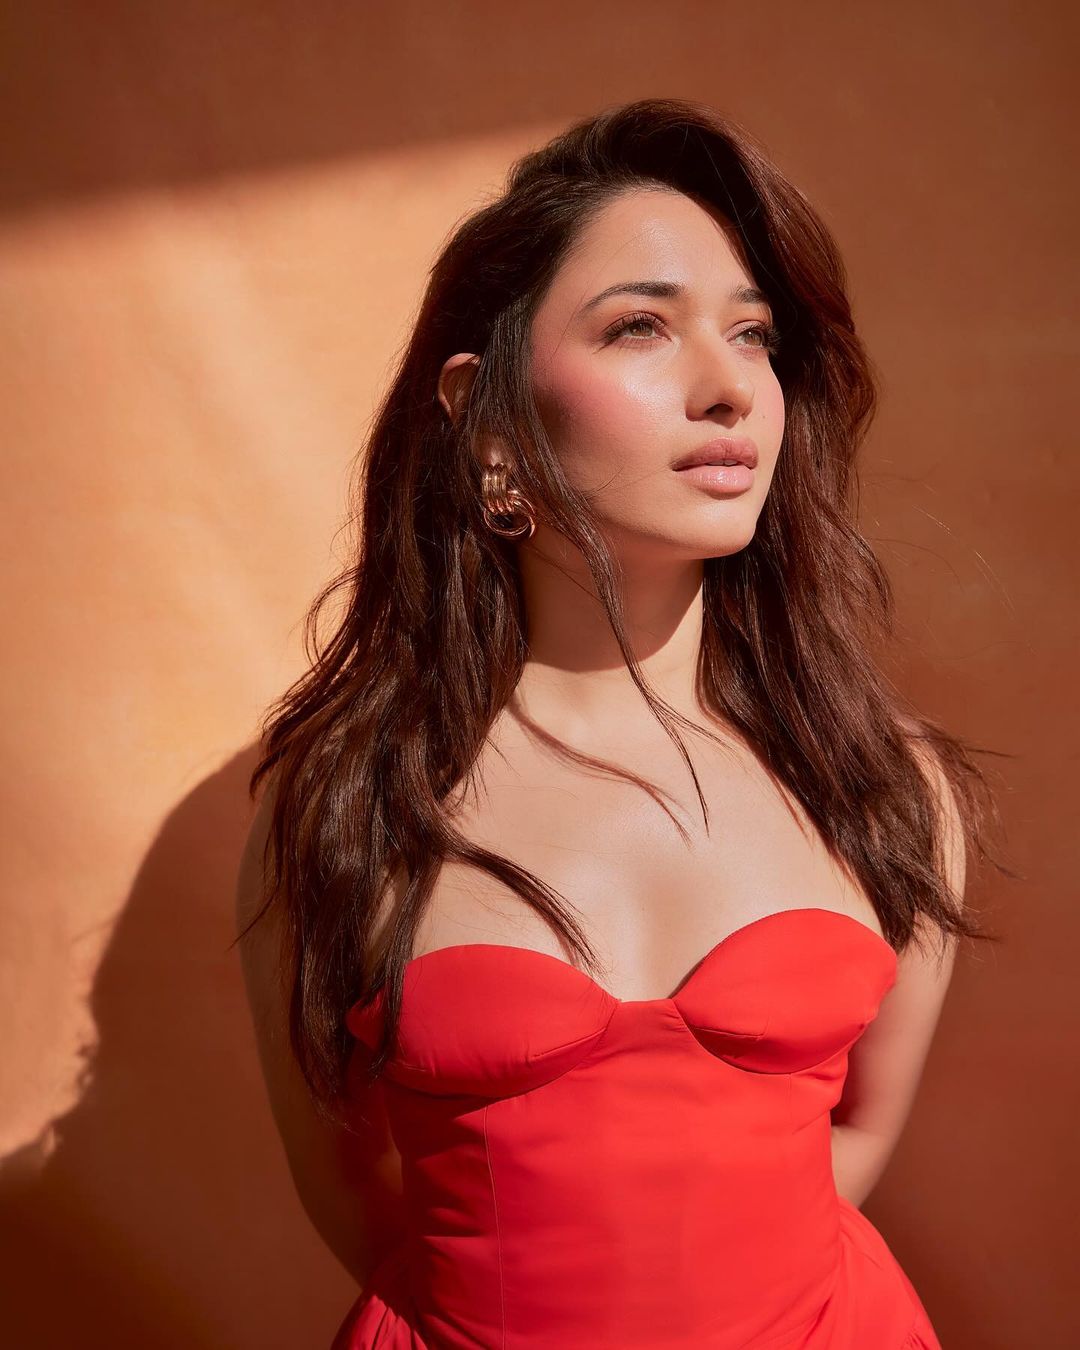 Pic Talk: Red Hot Curves Of Tamannaah